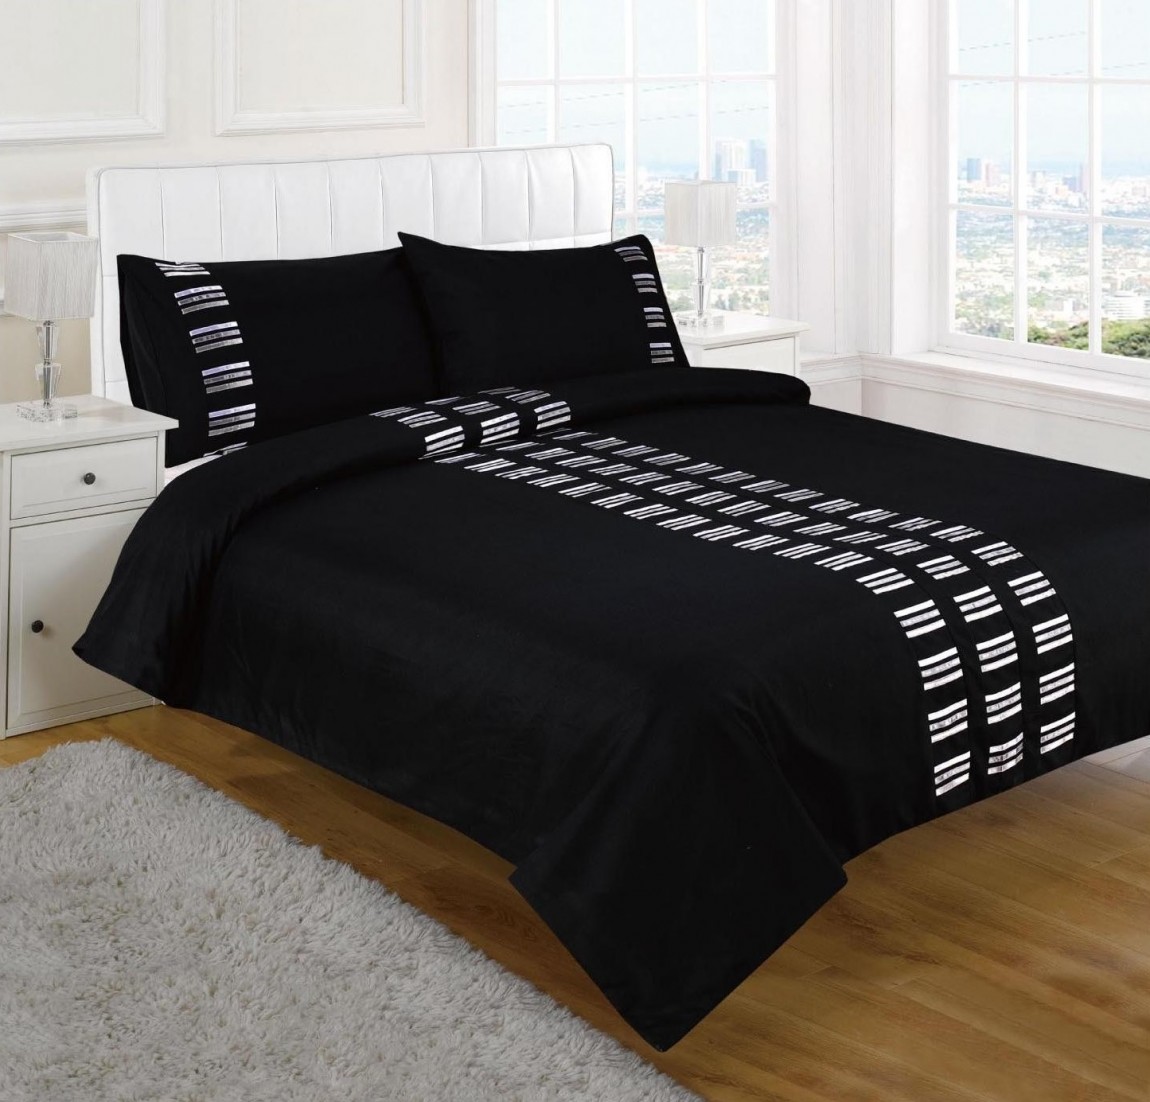 Black And Covers Terrific Black And White Duvet Covers In Renzo Cushion Cover Black Installed With White Nightstand And White Table Lamp On Wooden Floor Dining Room  Cozy Black And White Duvet Covers Collection For Comfortable Bedrooms